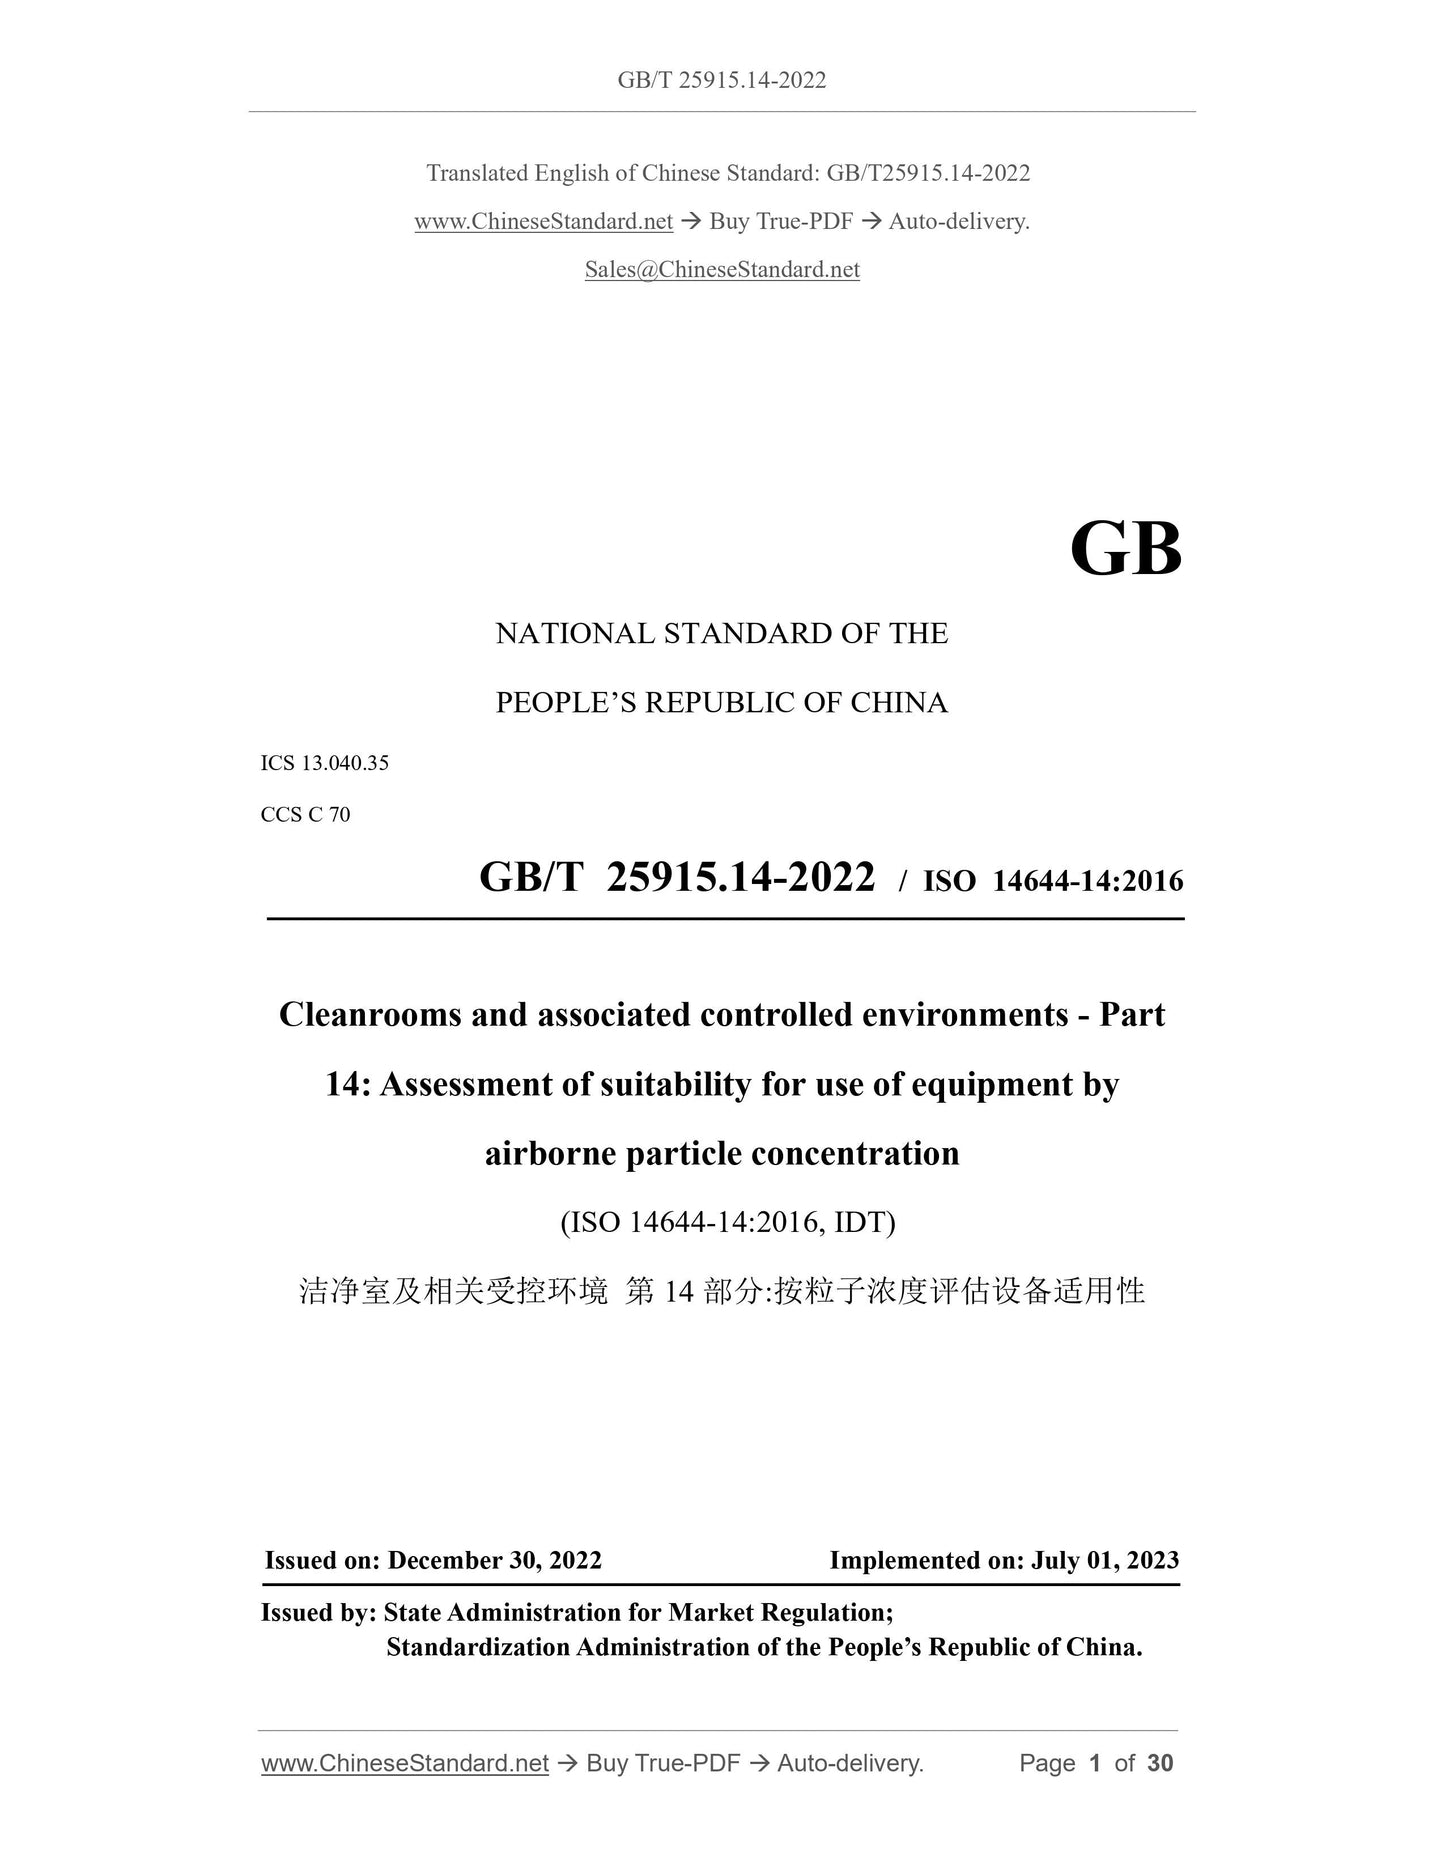 GB/T 25915.14-2022 Page 1